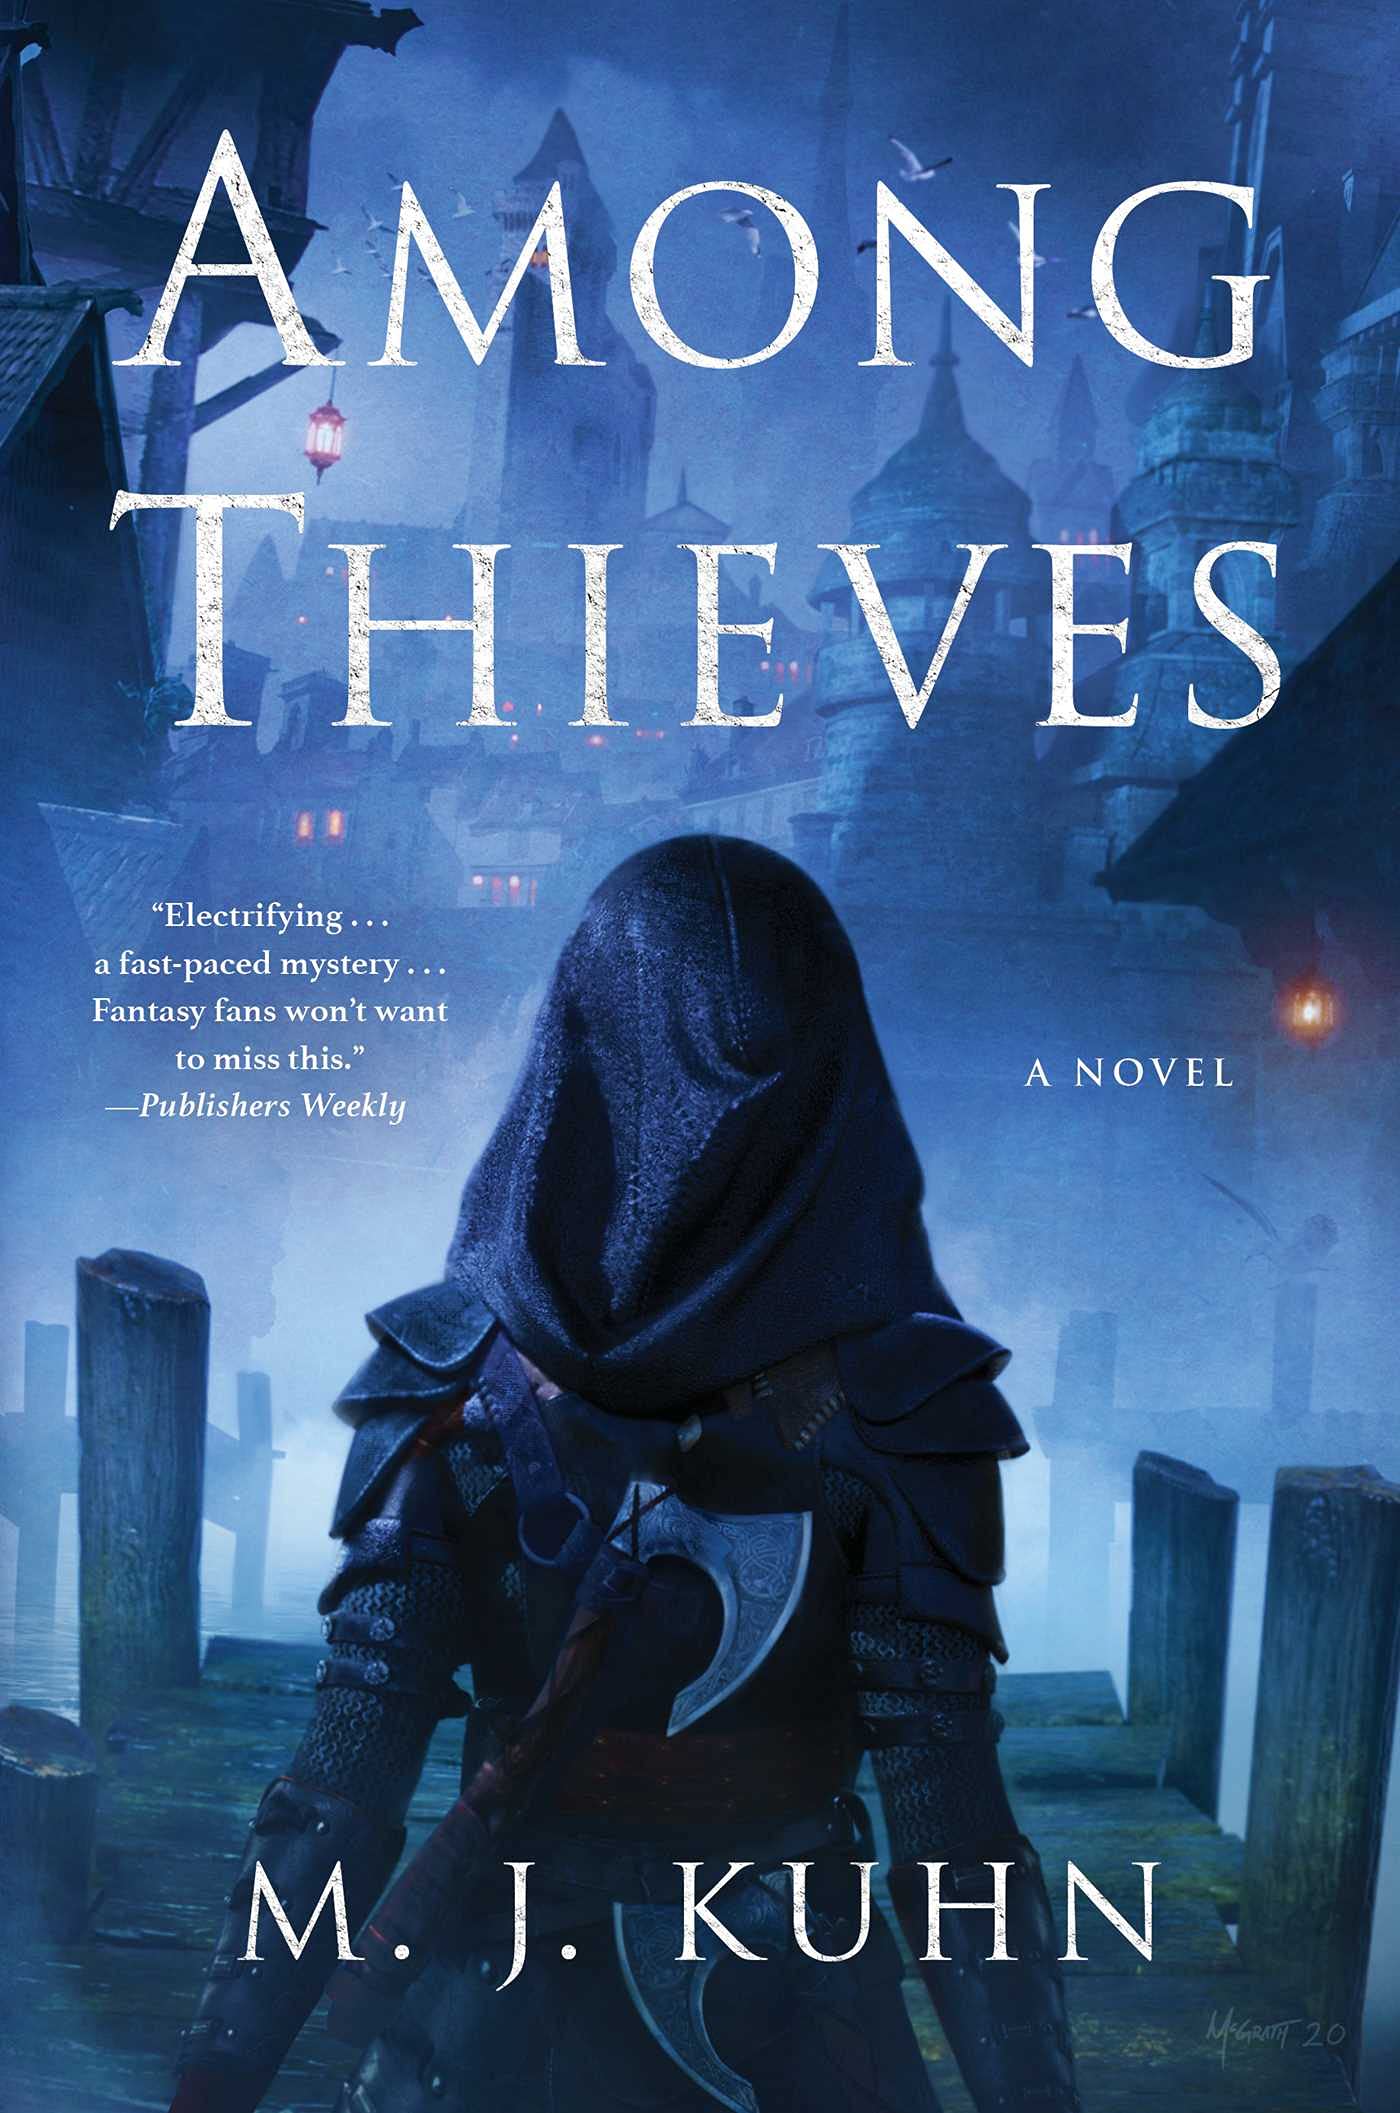 M.J. Kuhn: Among Thieves (2021, Simon & Schuster Books For Young Readers)